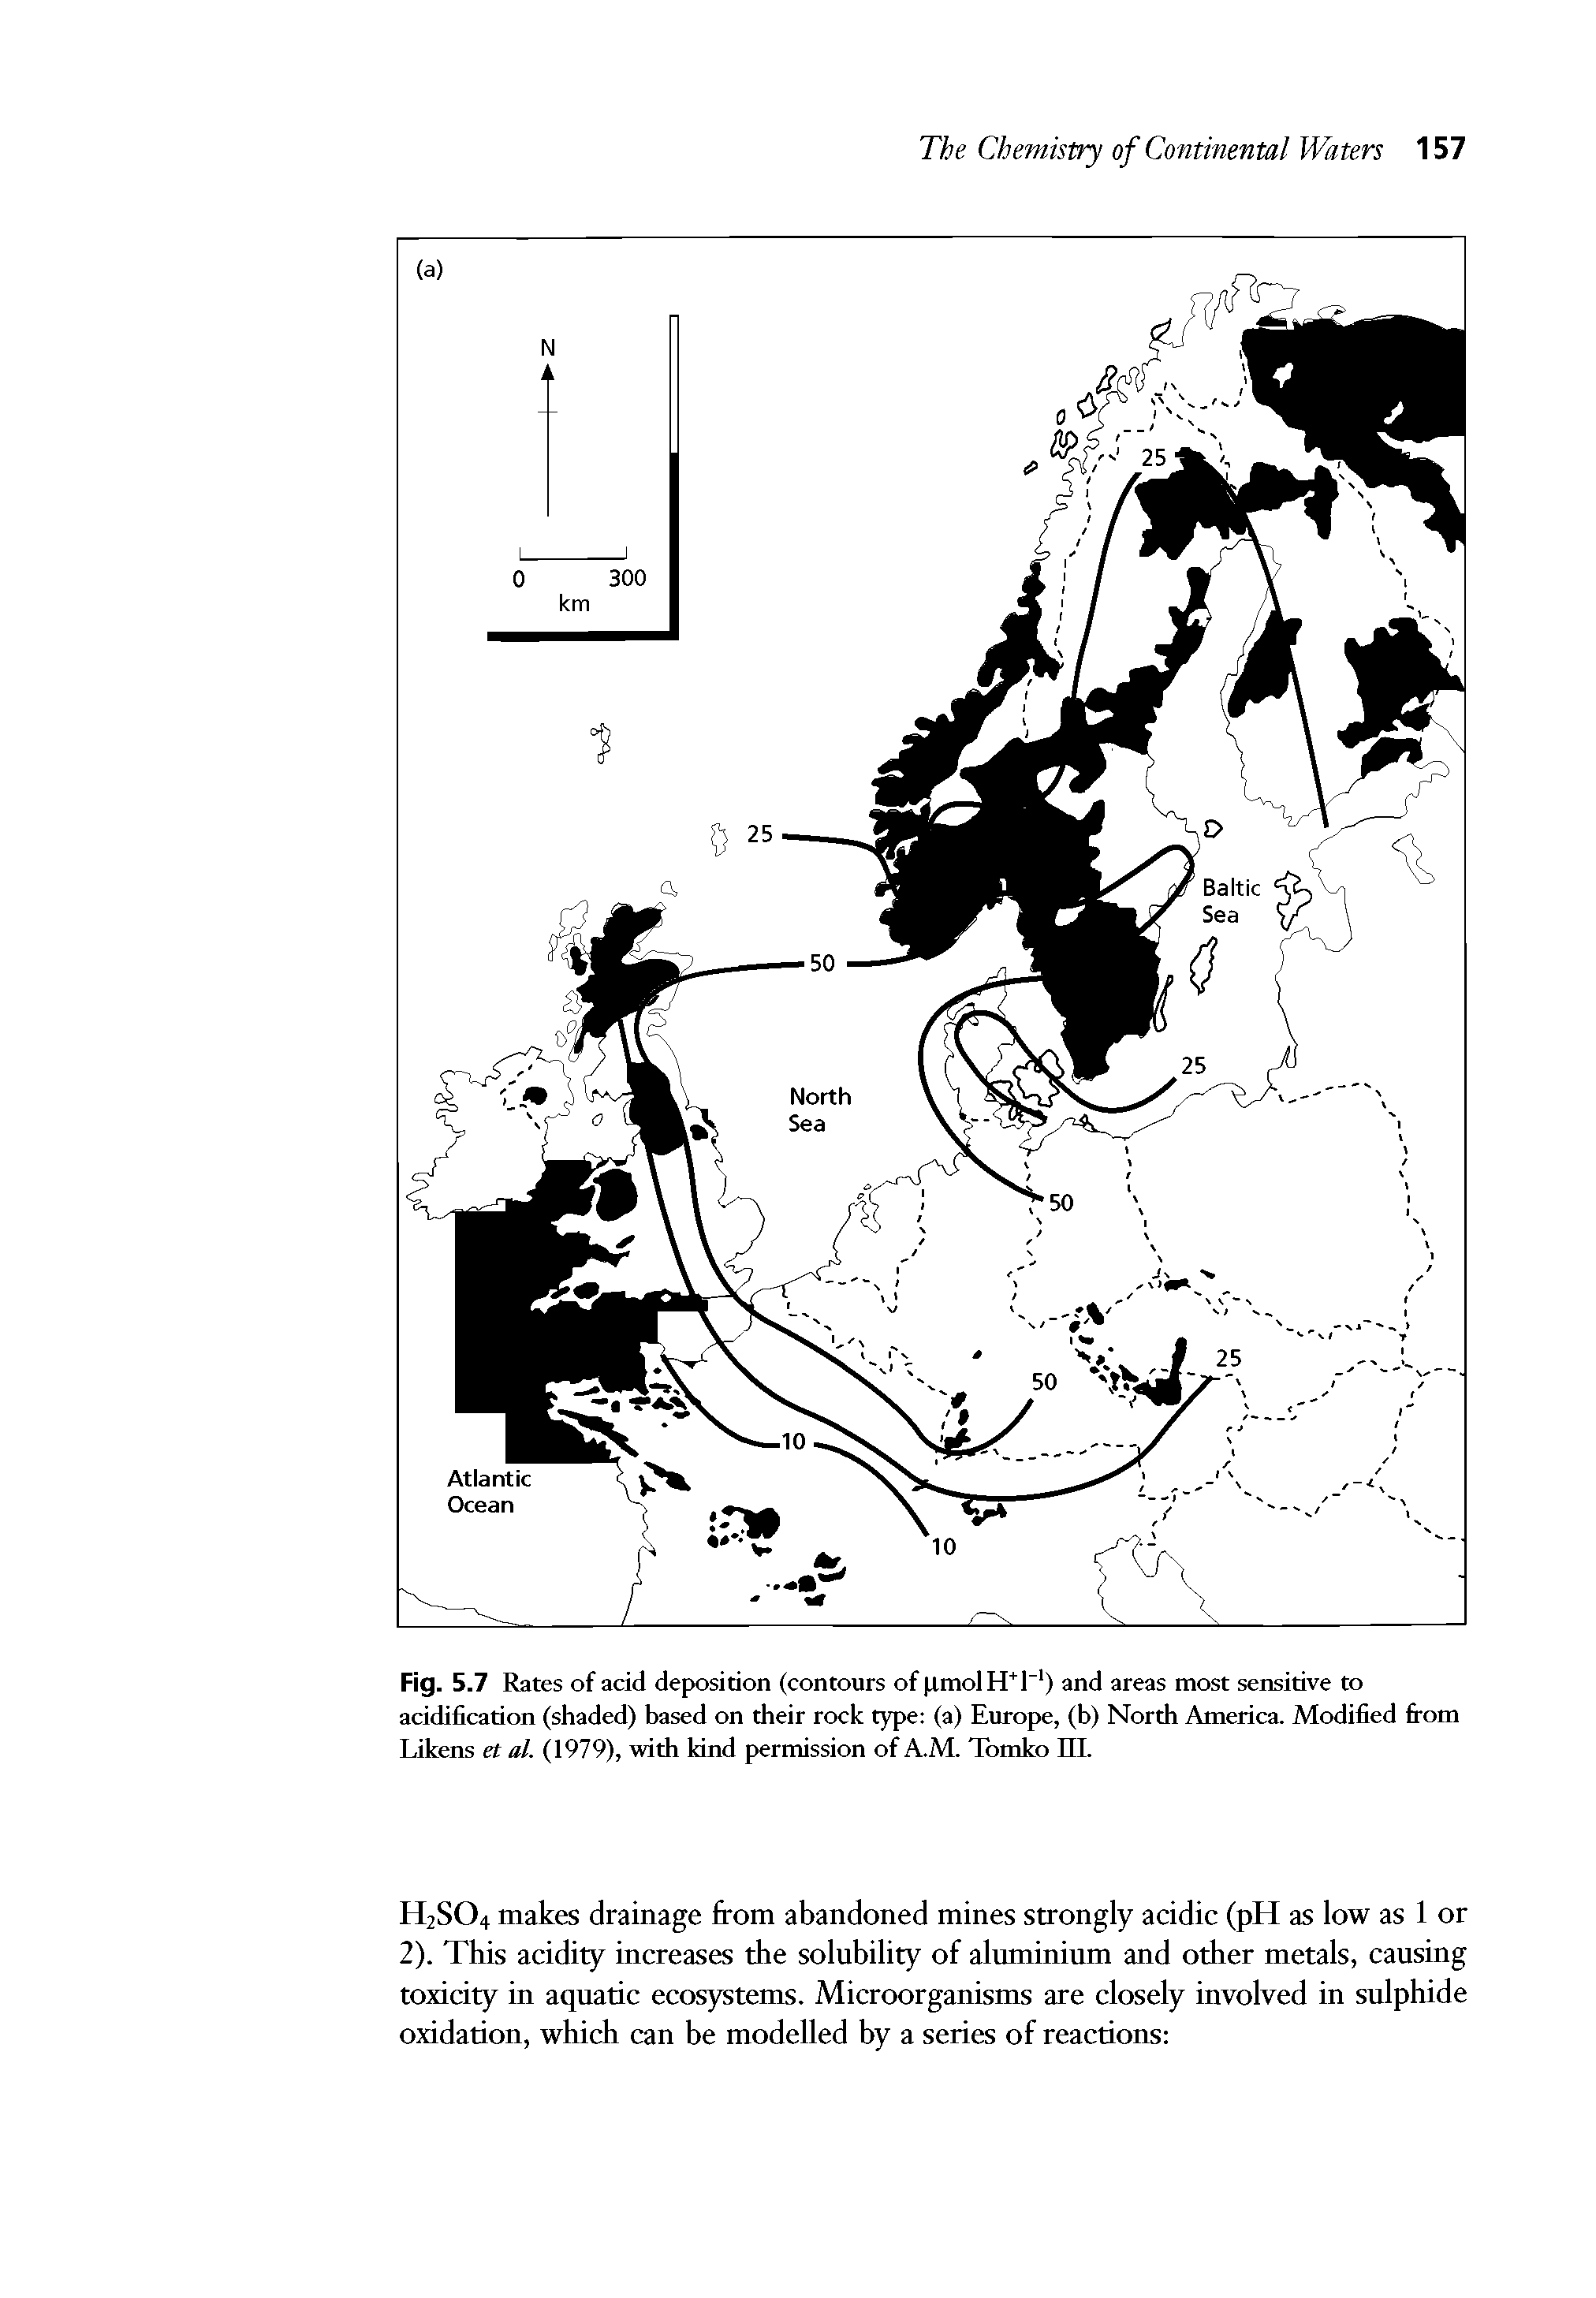 Fig. 5.7 Rates of acid deposition (contours of imol H+1 ) and areas most sensitive to acidification (shaded) based on their rock type (a) Europe, (b) North America. Modified from Likens et at. (1979), with kind permission of A.M. Tomko IIL...